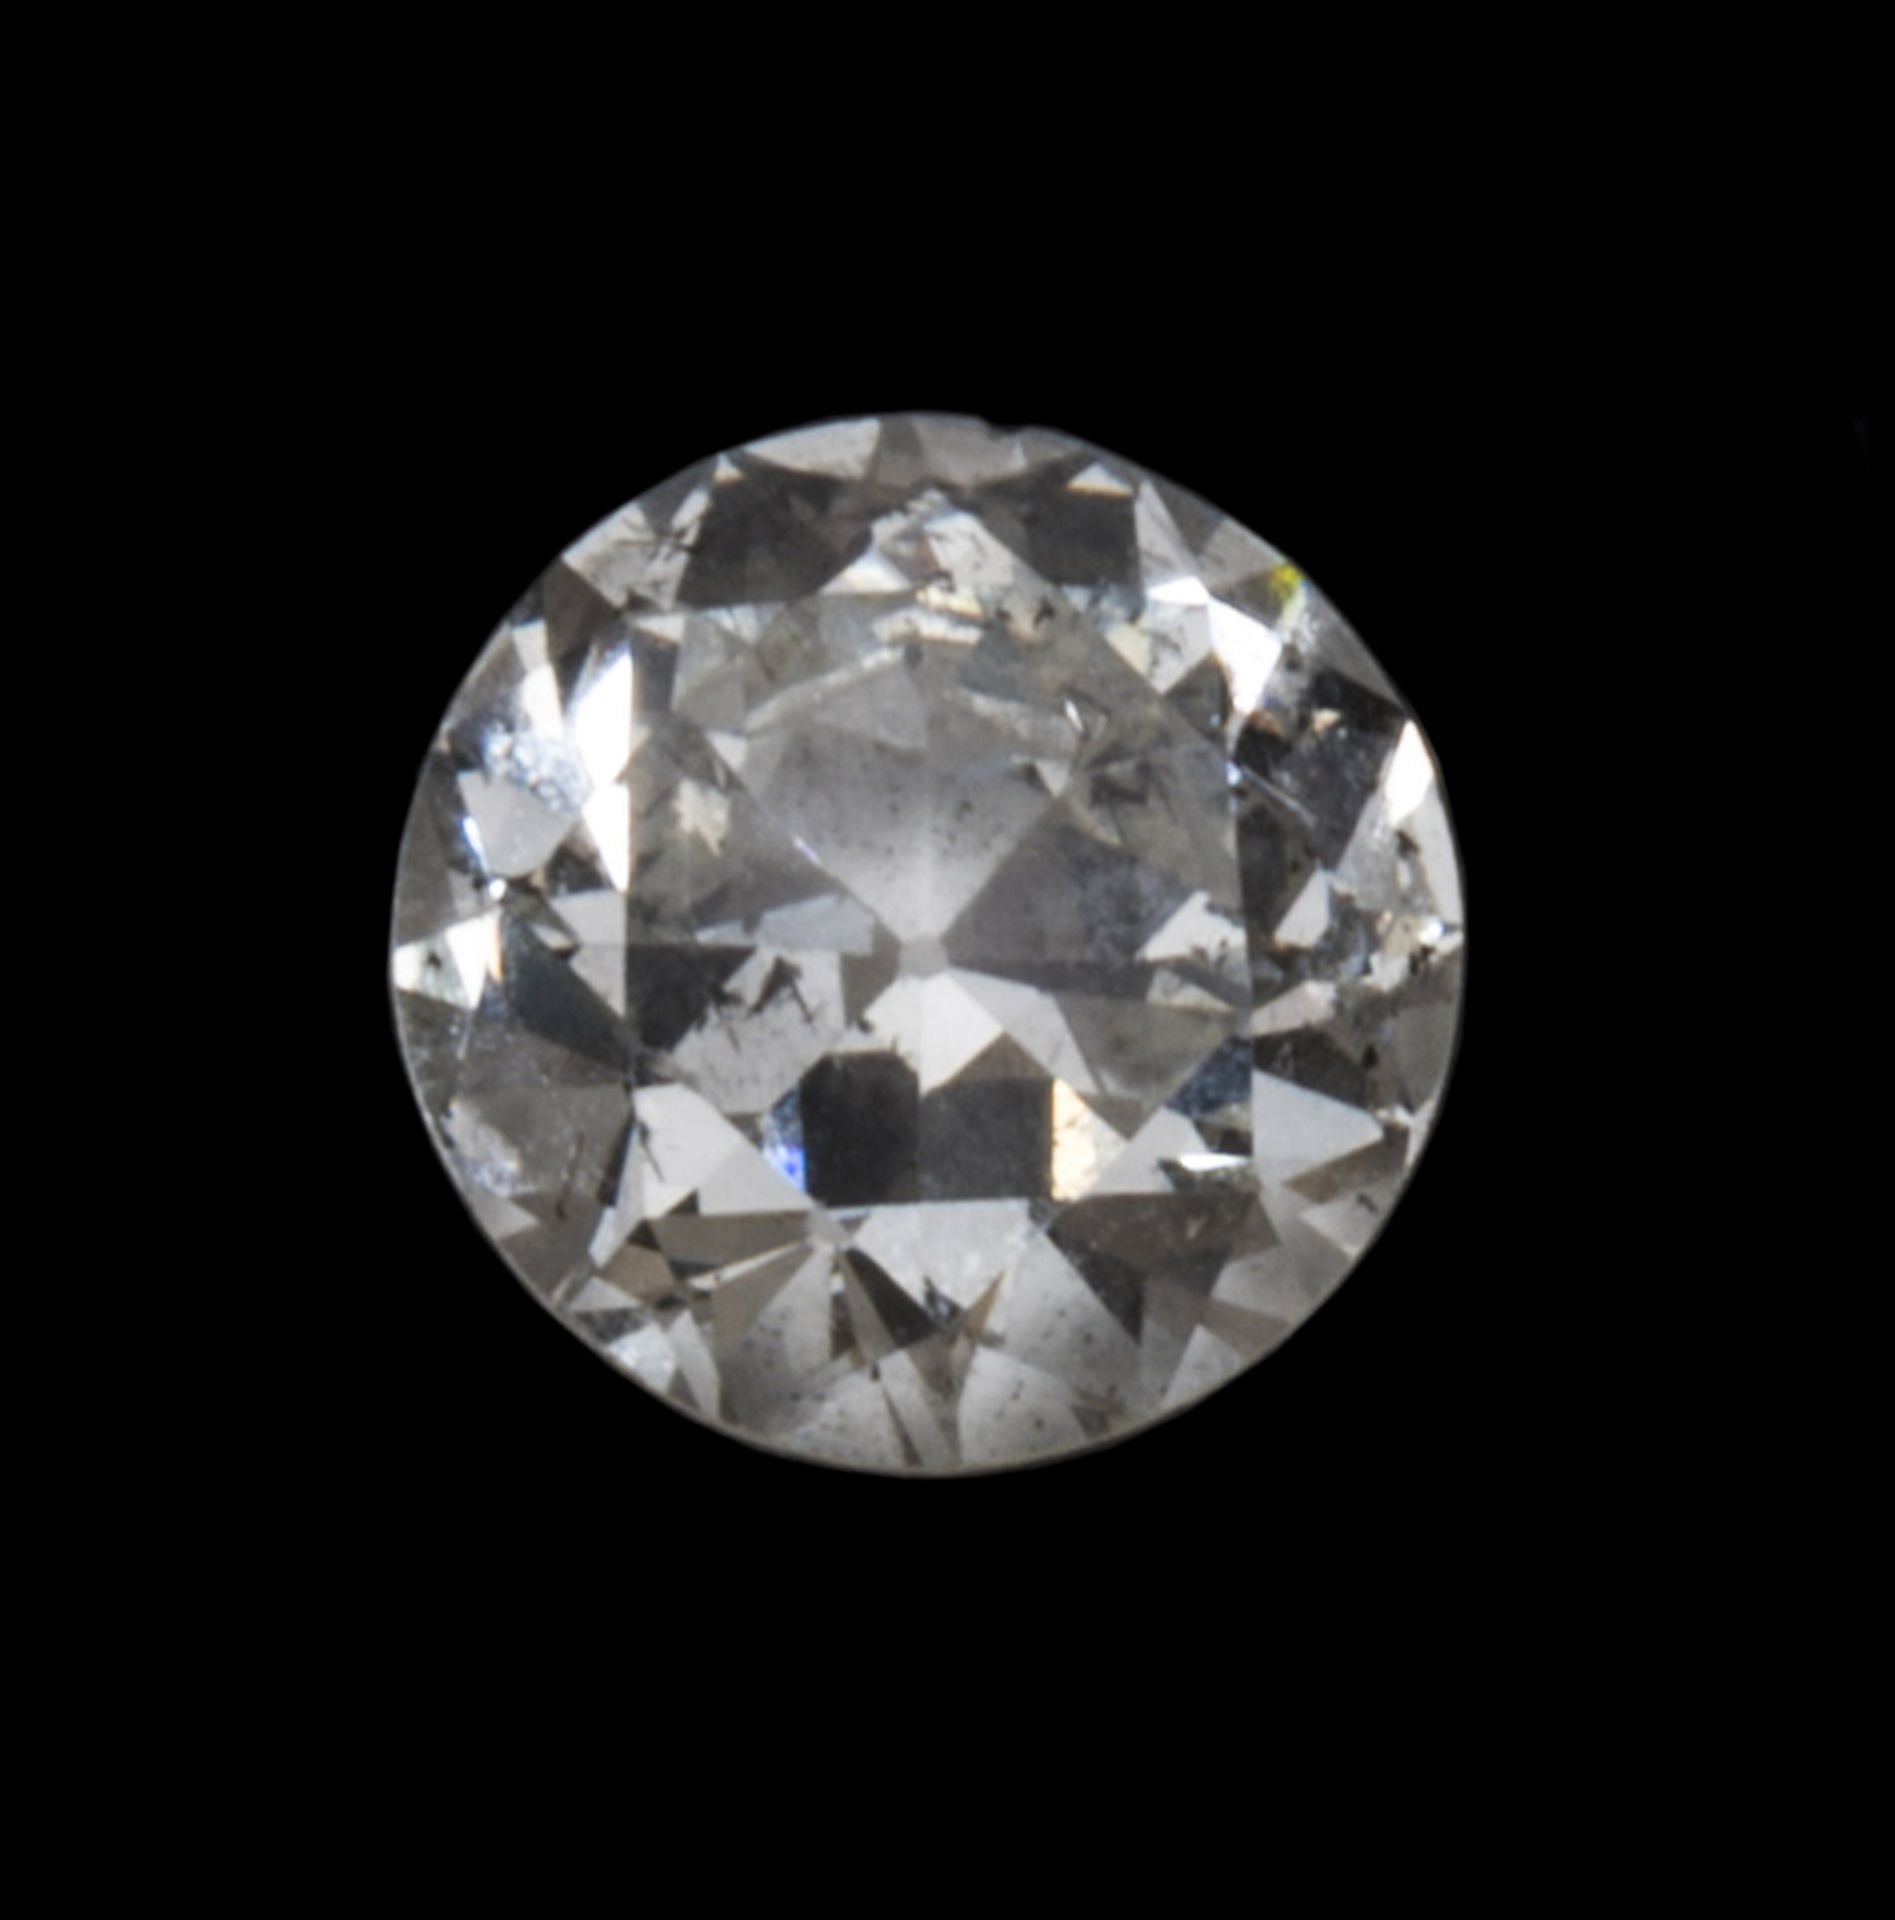 TWO DIAMONDS diamonds cut with typology color 'Cristal' and purity 'P3' and 'VVS2.' Measures mm. 2,5